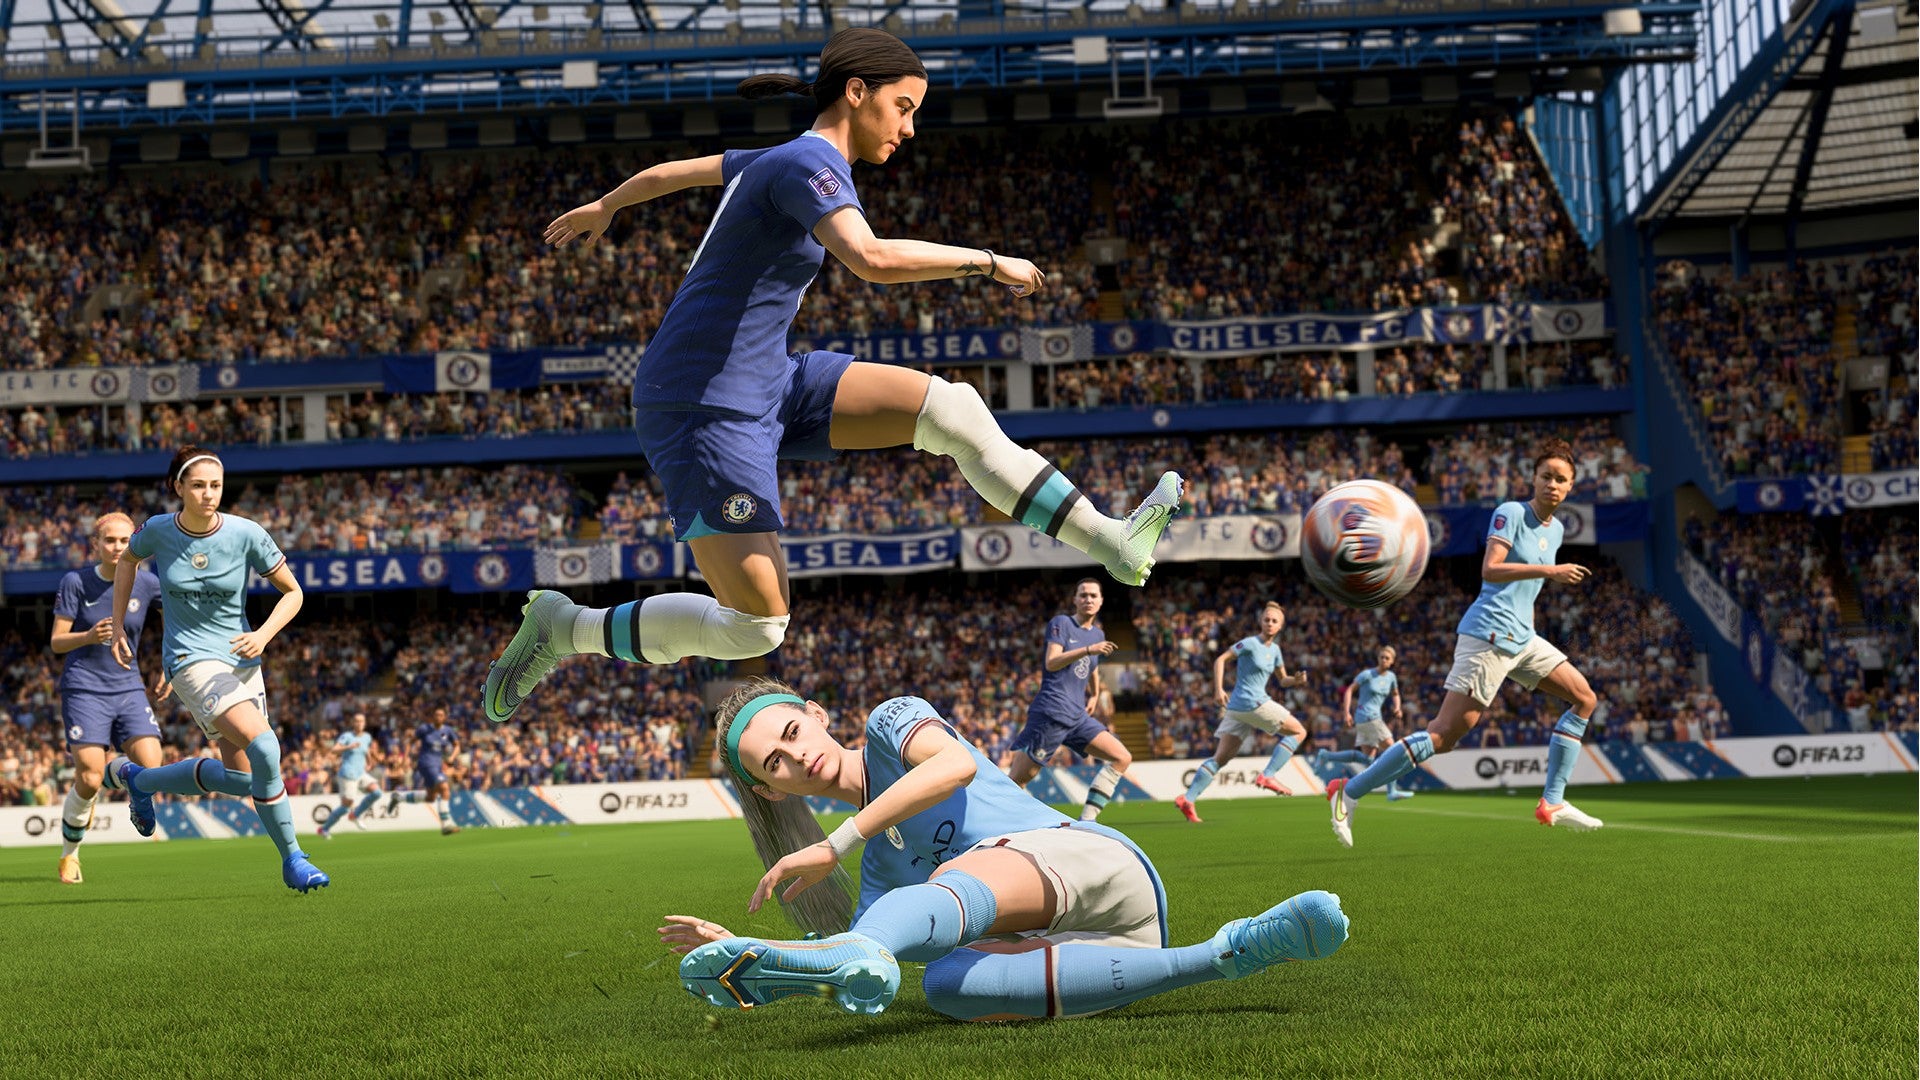 Fifa 23 image showing the women's Chelsea and Manchester City squads running along the pitch.